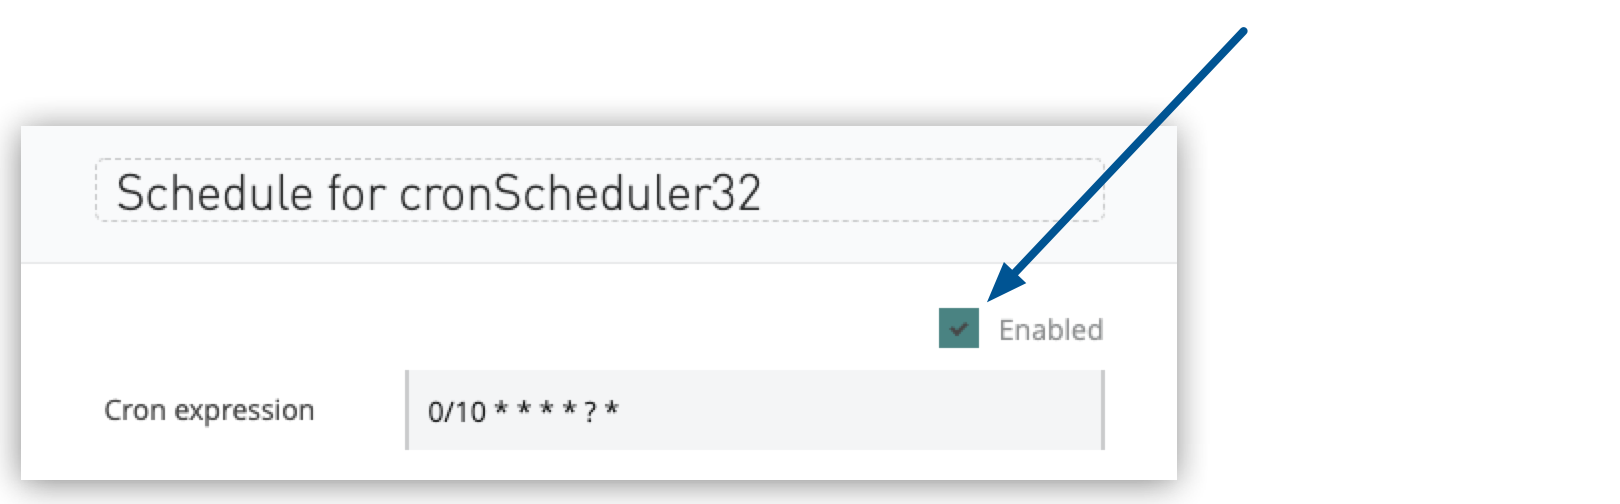 Enabled toggle in the schedule editor